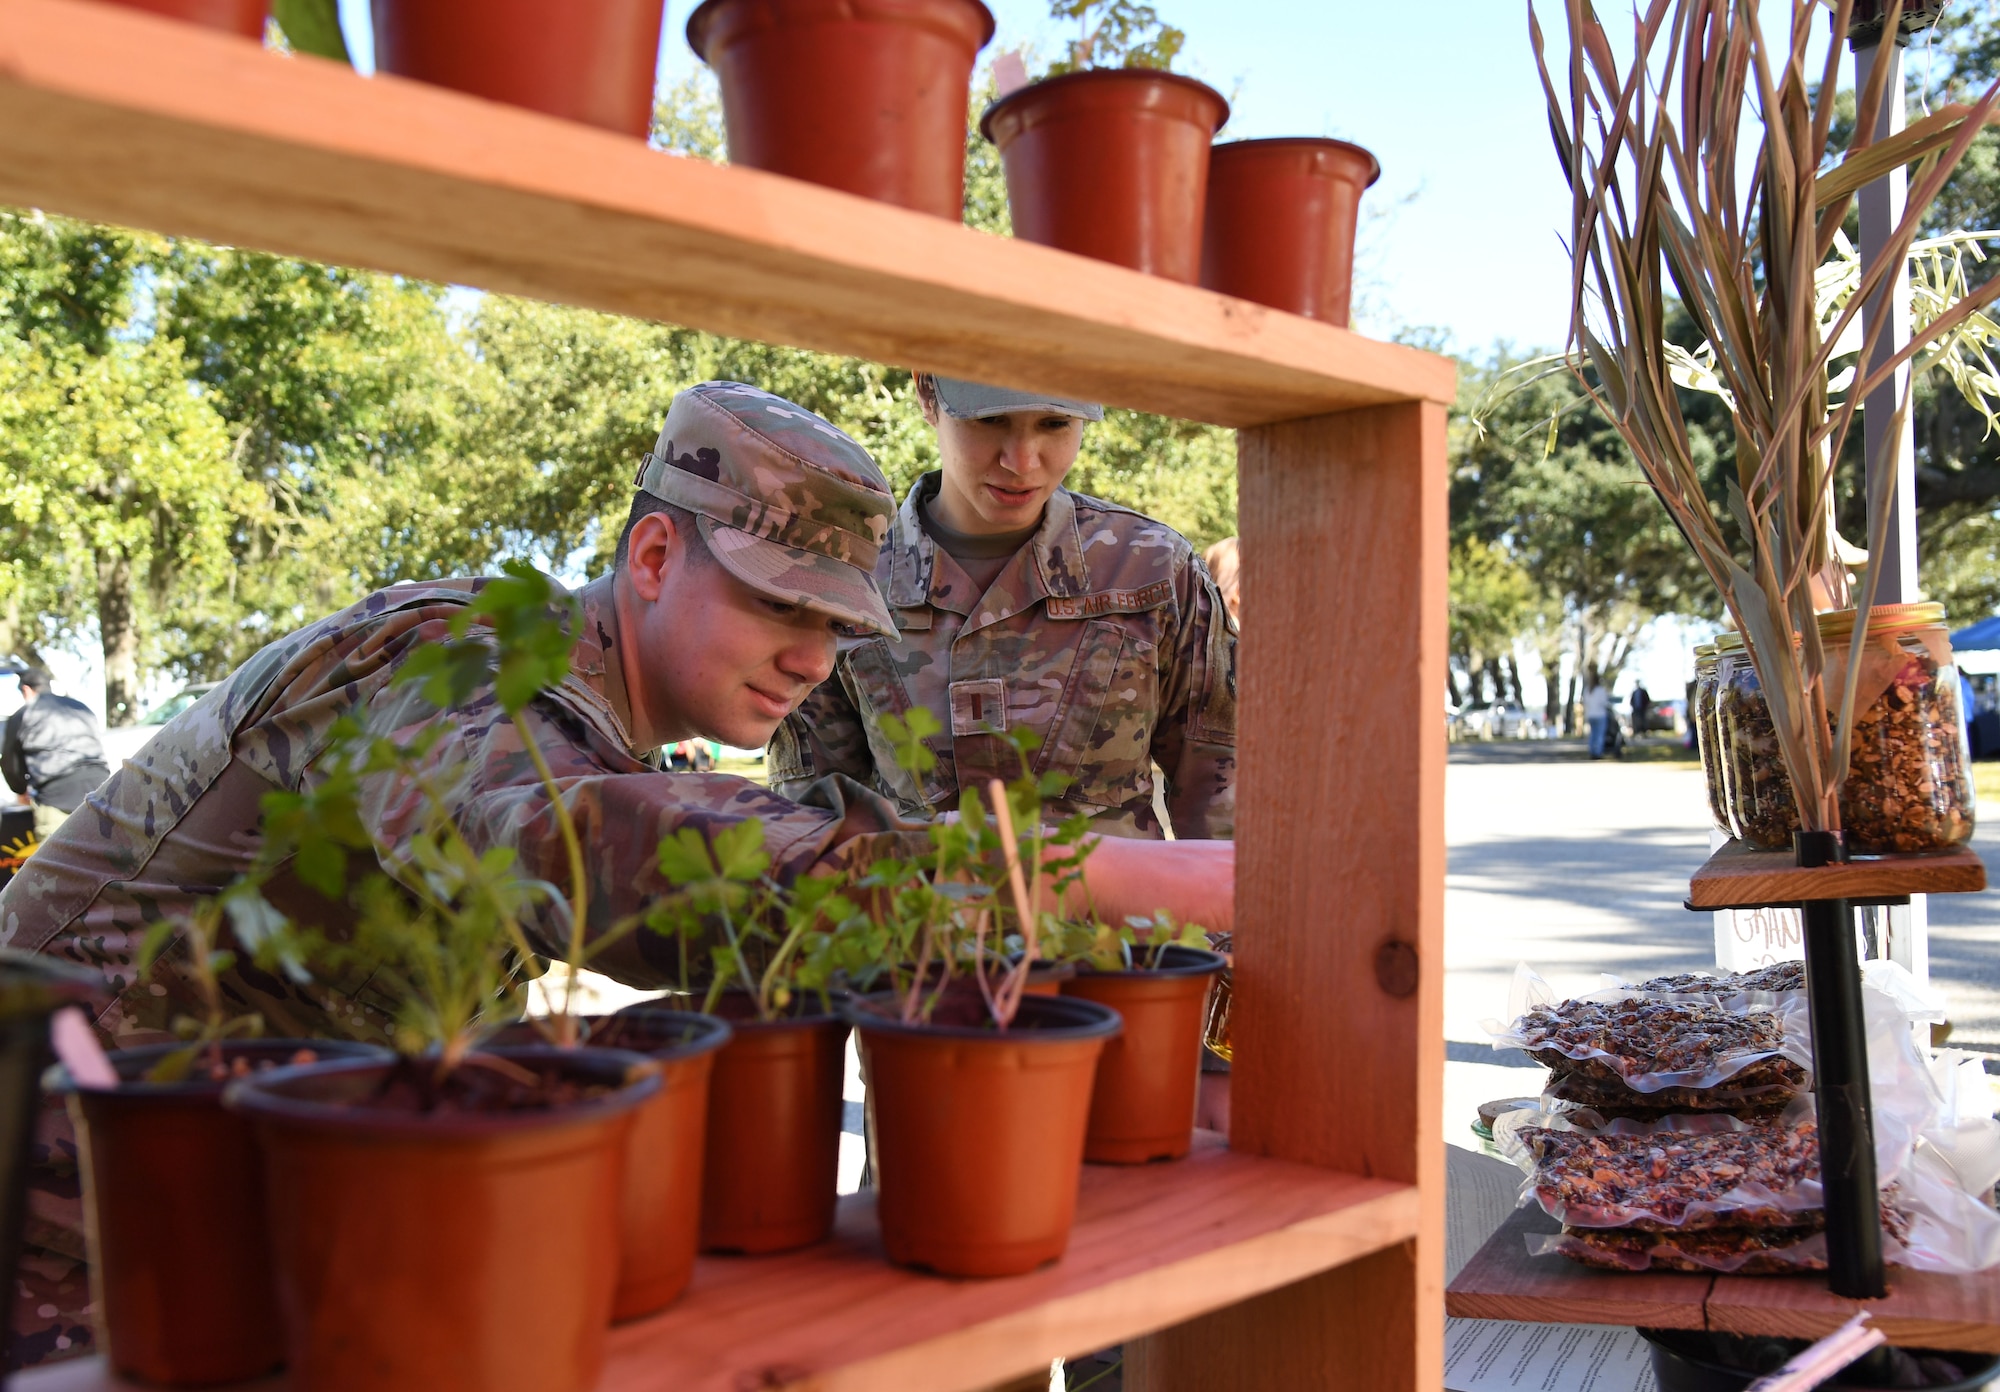 U.S. Air Force Airman 1st Class Trenten Walters, 81st Training Wing public affairs photojournalist, and 2nd Lt. Kristina Dean, 81st TRW public affairs officer, inspect planted herbs during the Farmer's Market at the marina park at Keesler Air Force Base, Mississippi, Jan. 27, 2023.